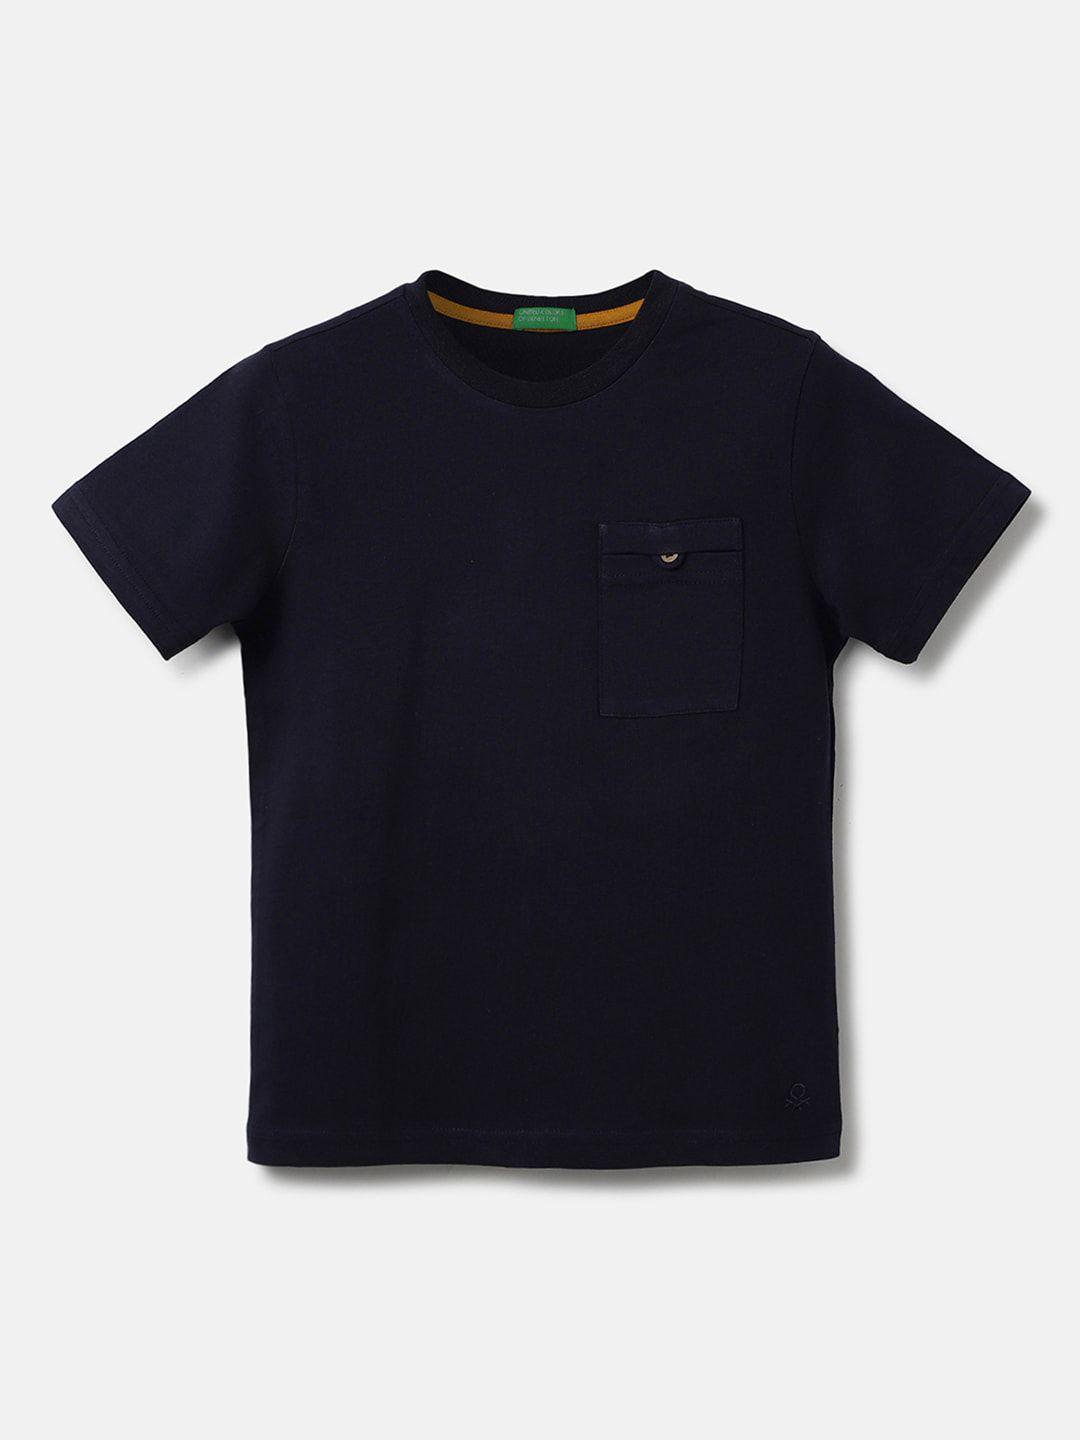 united-colors-of-benetton-boys-round-neck-t-shirt